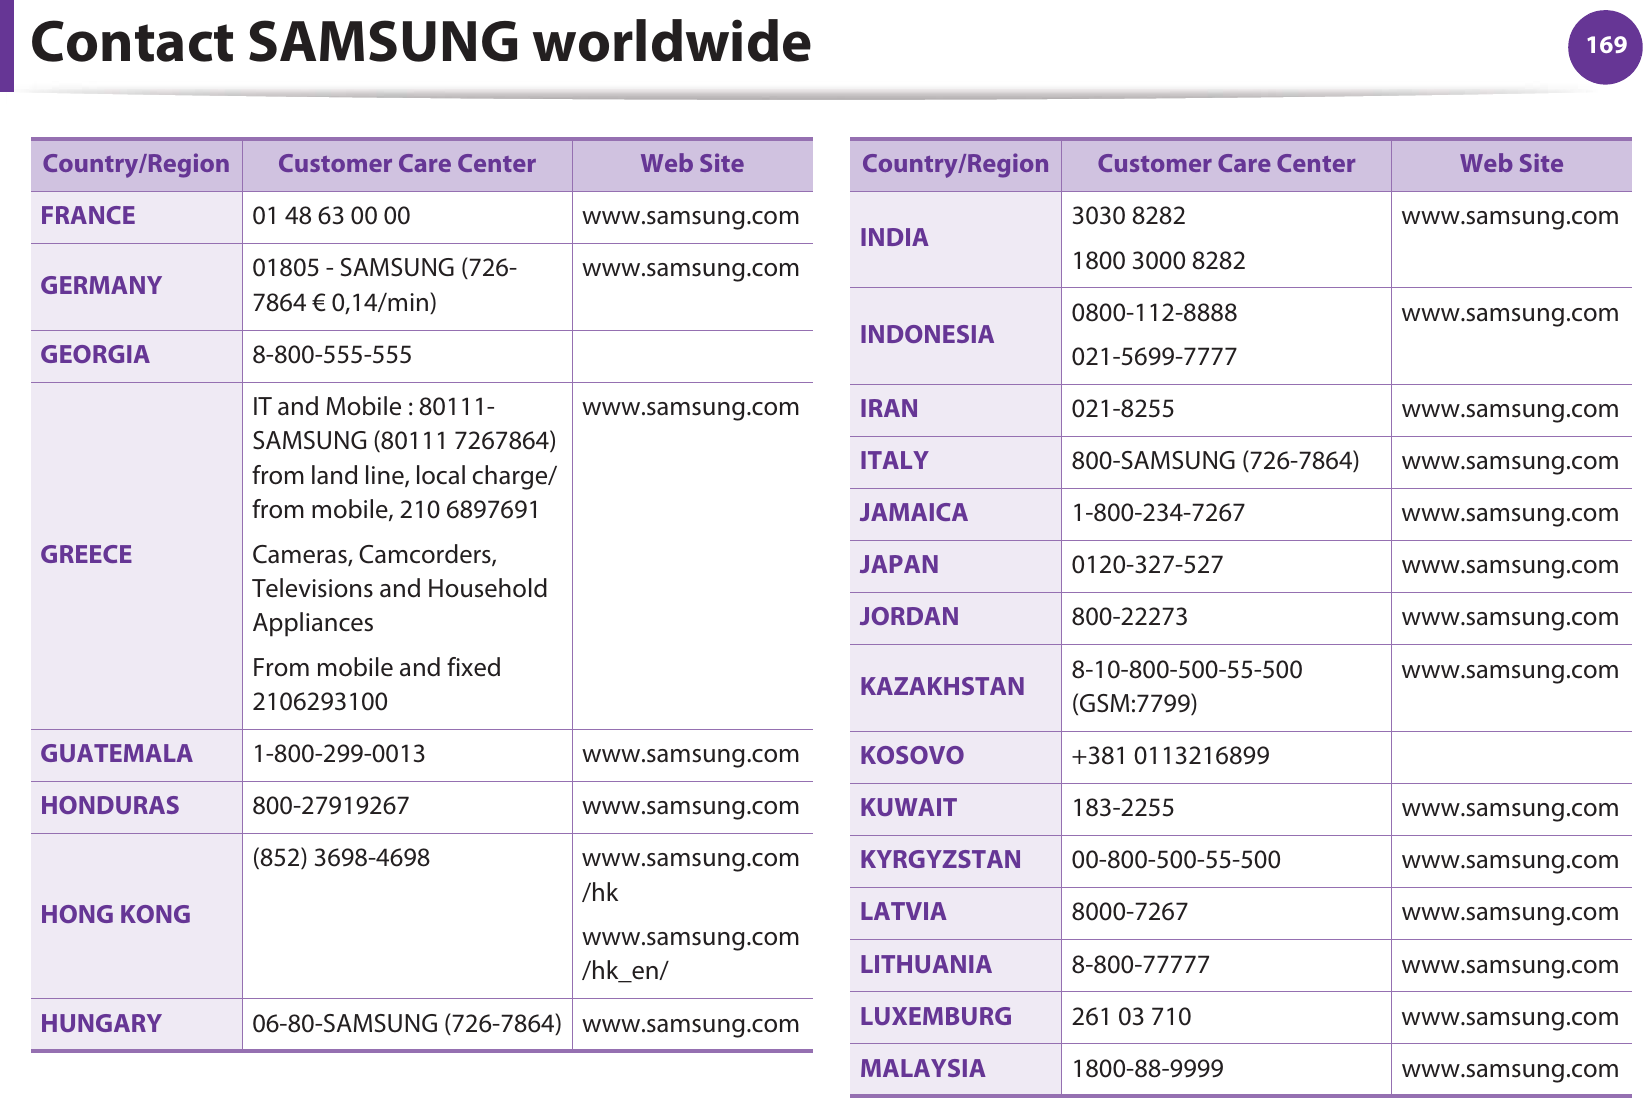 Contact SAMSUNG worldwide 169FRANCE 01 48 63 00 00 www.samsung.comGERMANY 01805 - SAMSUNG (726-7864 € 0,14/min)www.samsung.comGEORGIA 8-800-555-555GREECEIT and Mobile : 80111-SAMSUNG (80111 7267864) from land line, local charge/ from mobile, 210 6897691 Cameras, Camcorders, Televisions and Household AppliancesFrom mobile and fixed 2106293100www.samsung.comGUATEMALA 1-800-299-0013 www.samsung.comHONDURAS 800-27919267 www.samsung.comHONG KONG(852) 3698-4698 www.samsung.com/hkwww.samsung.com/hk_en/HUNGARY 06-80-SAMSUNG (726-7864) www.samsung.comCountry/Region Customer Care Center  Web SiteINDIA 3030 82821800 3000 8282 www.samsung.comINDONESIA 0800-112-8888021-5699-7777www.samsung.comIRAN 021-8255 www.samsung.comITALY 800-SAMSUNG (726-7864) www.samsung.comJAMAICA 1-800-234-7267 www.samsung.comJAPAN 0120-327-527 www.samsung.comJORDAN 800-22273 www.samsung.comKAZAKHSTAN 8-10-800-500-55-500 (GSM:7799)www.samsung.comKOSOVO +381 0113216899KUWAIT 183-2255 www.samsung.comKYRGYZSTAN 00-800-500-55-500 www.samsung.comLATVIA 8000-7267 www.samsung.comLITHUANIA 8-800-77777 www.samsung.comLUXEMBURG 261 03 710 www.samsung.comMALAYSIA 1800-88-9999 www.samsung.comCountry/Region Customer Care Center  Web Site